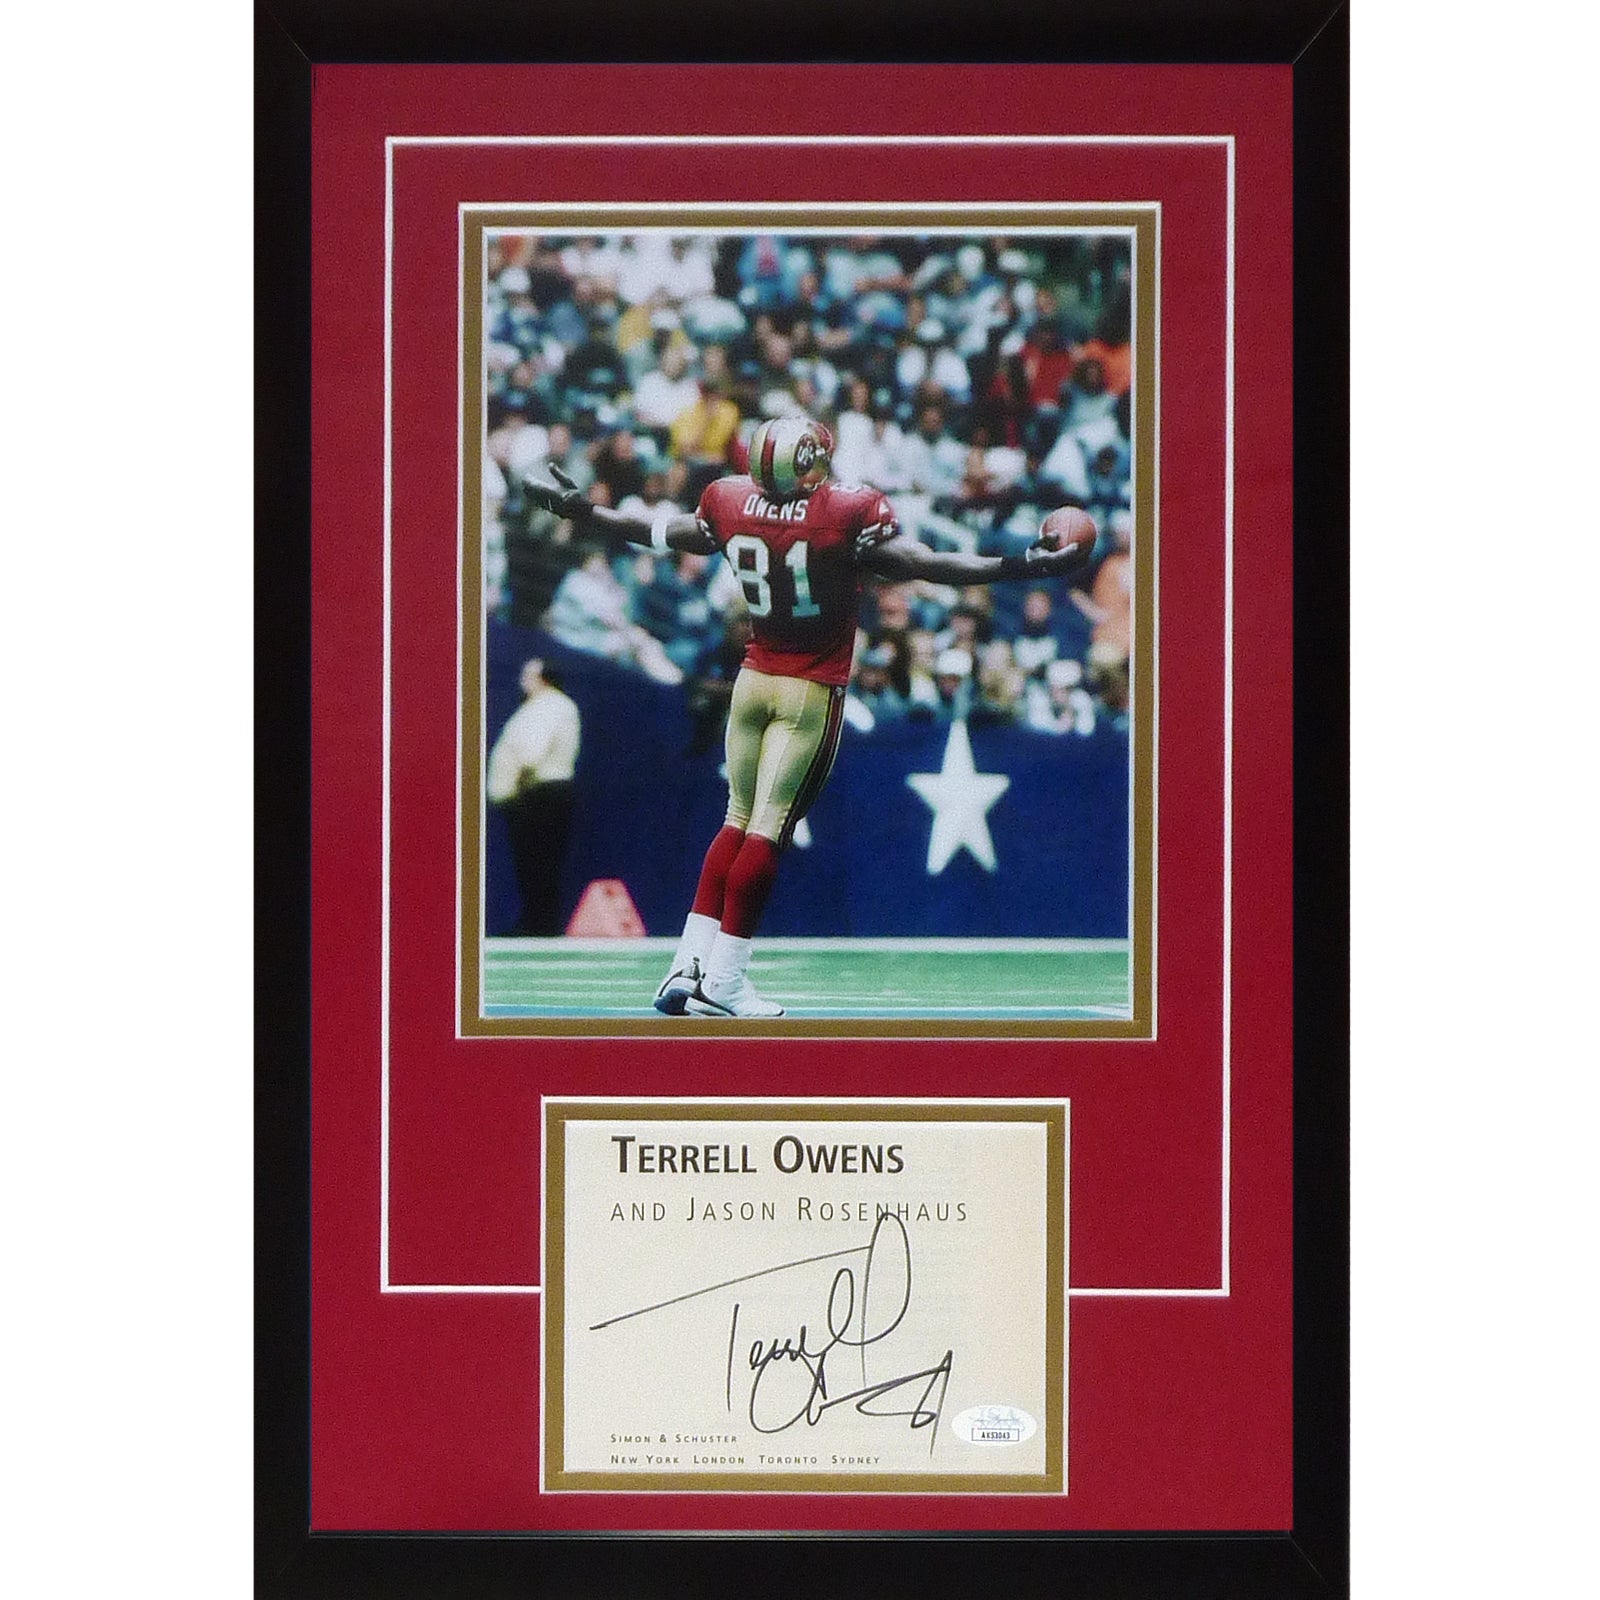 Terrell Owens Autographed San Francisco 49ers 